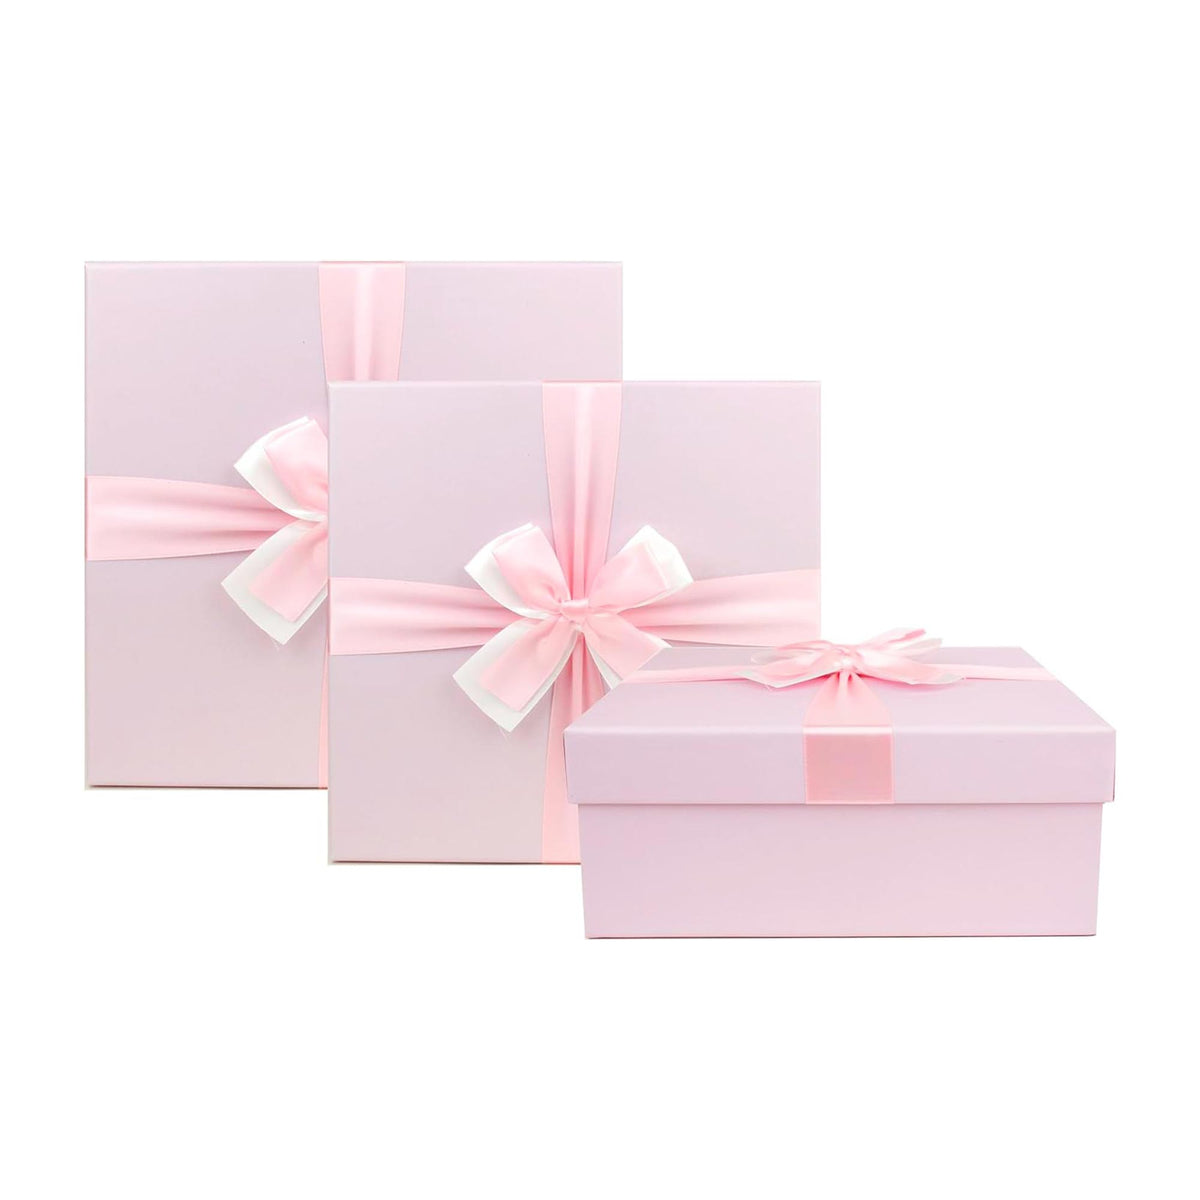 Luxury Baby Pink Gift Boxes - Set of 3 (Sizes Available)